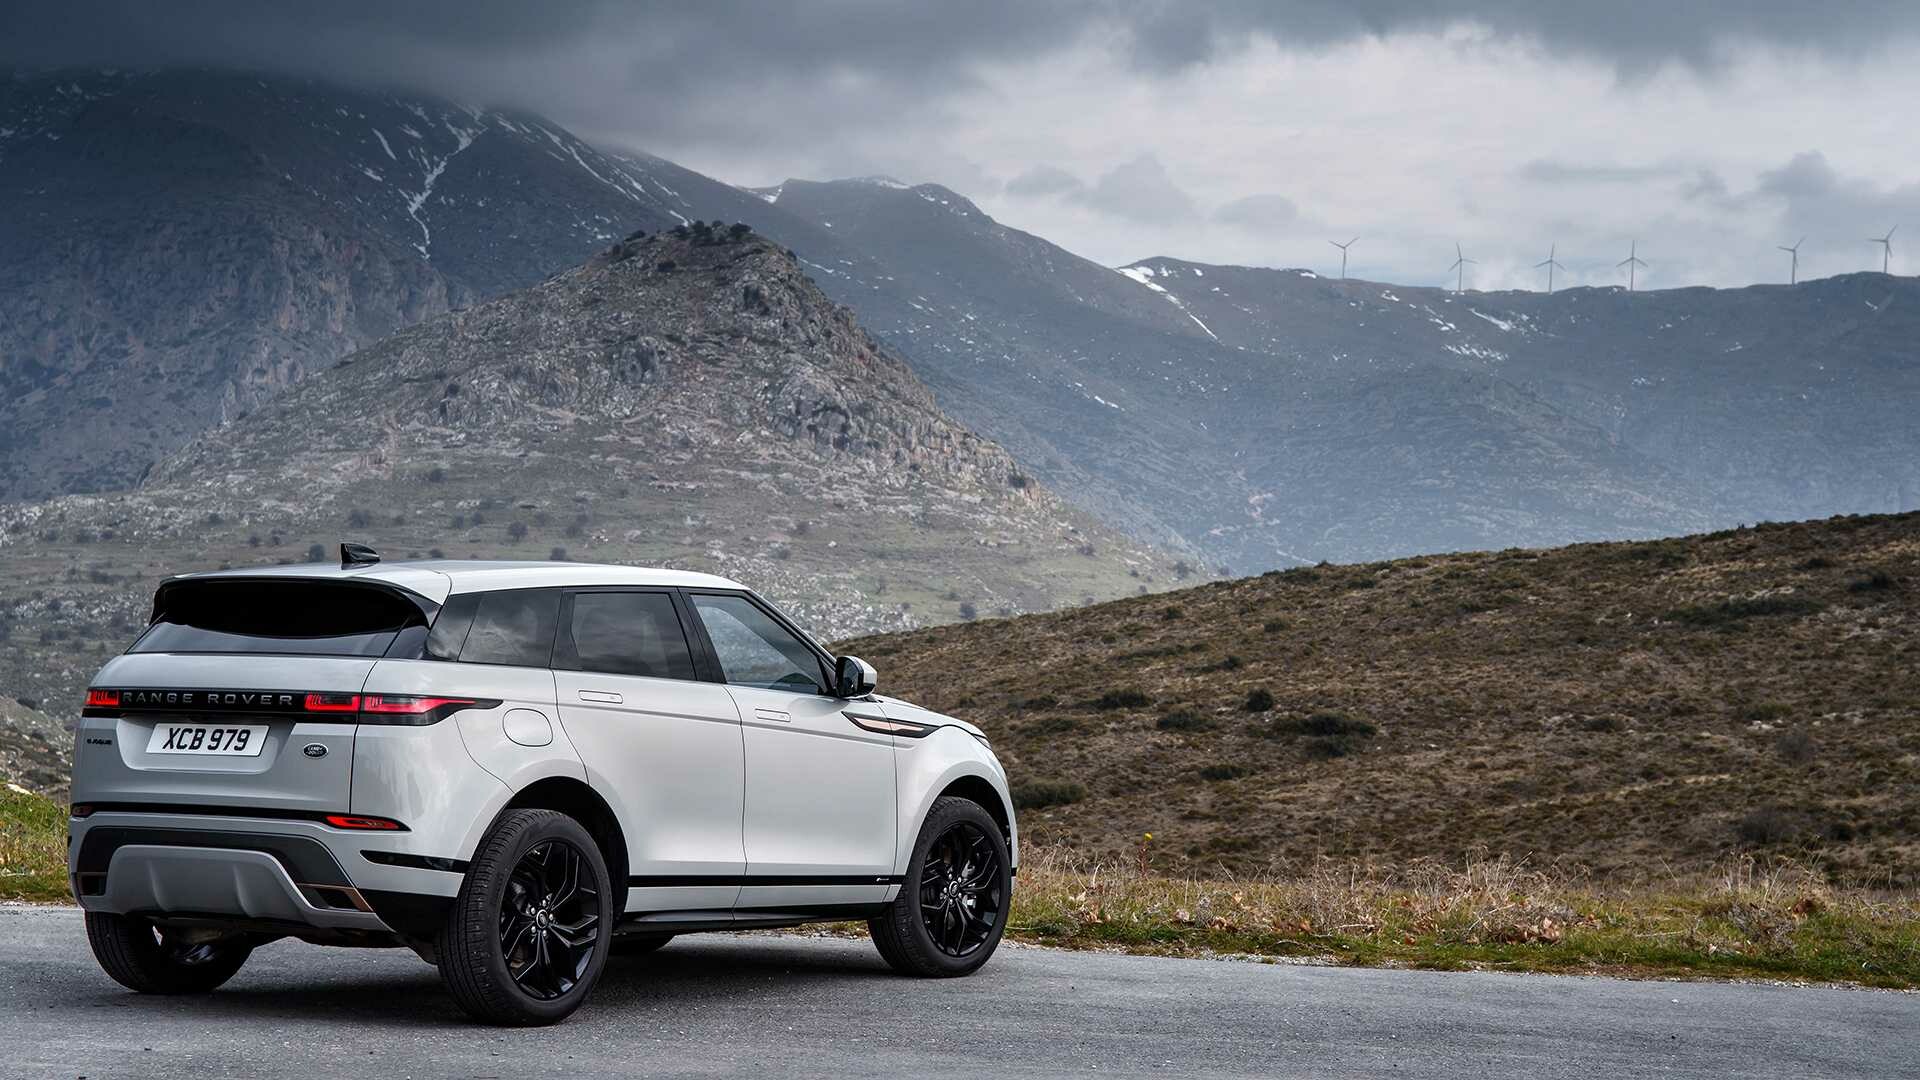 Range Rover: Evoque, Winner of the 2012 North American Truck of the Year. 1920x1080 Full HD Wallpaper.